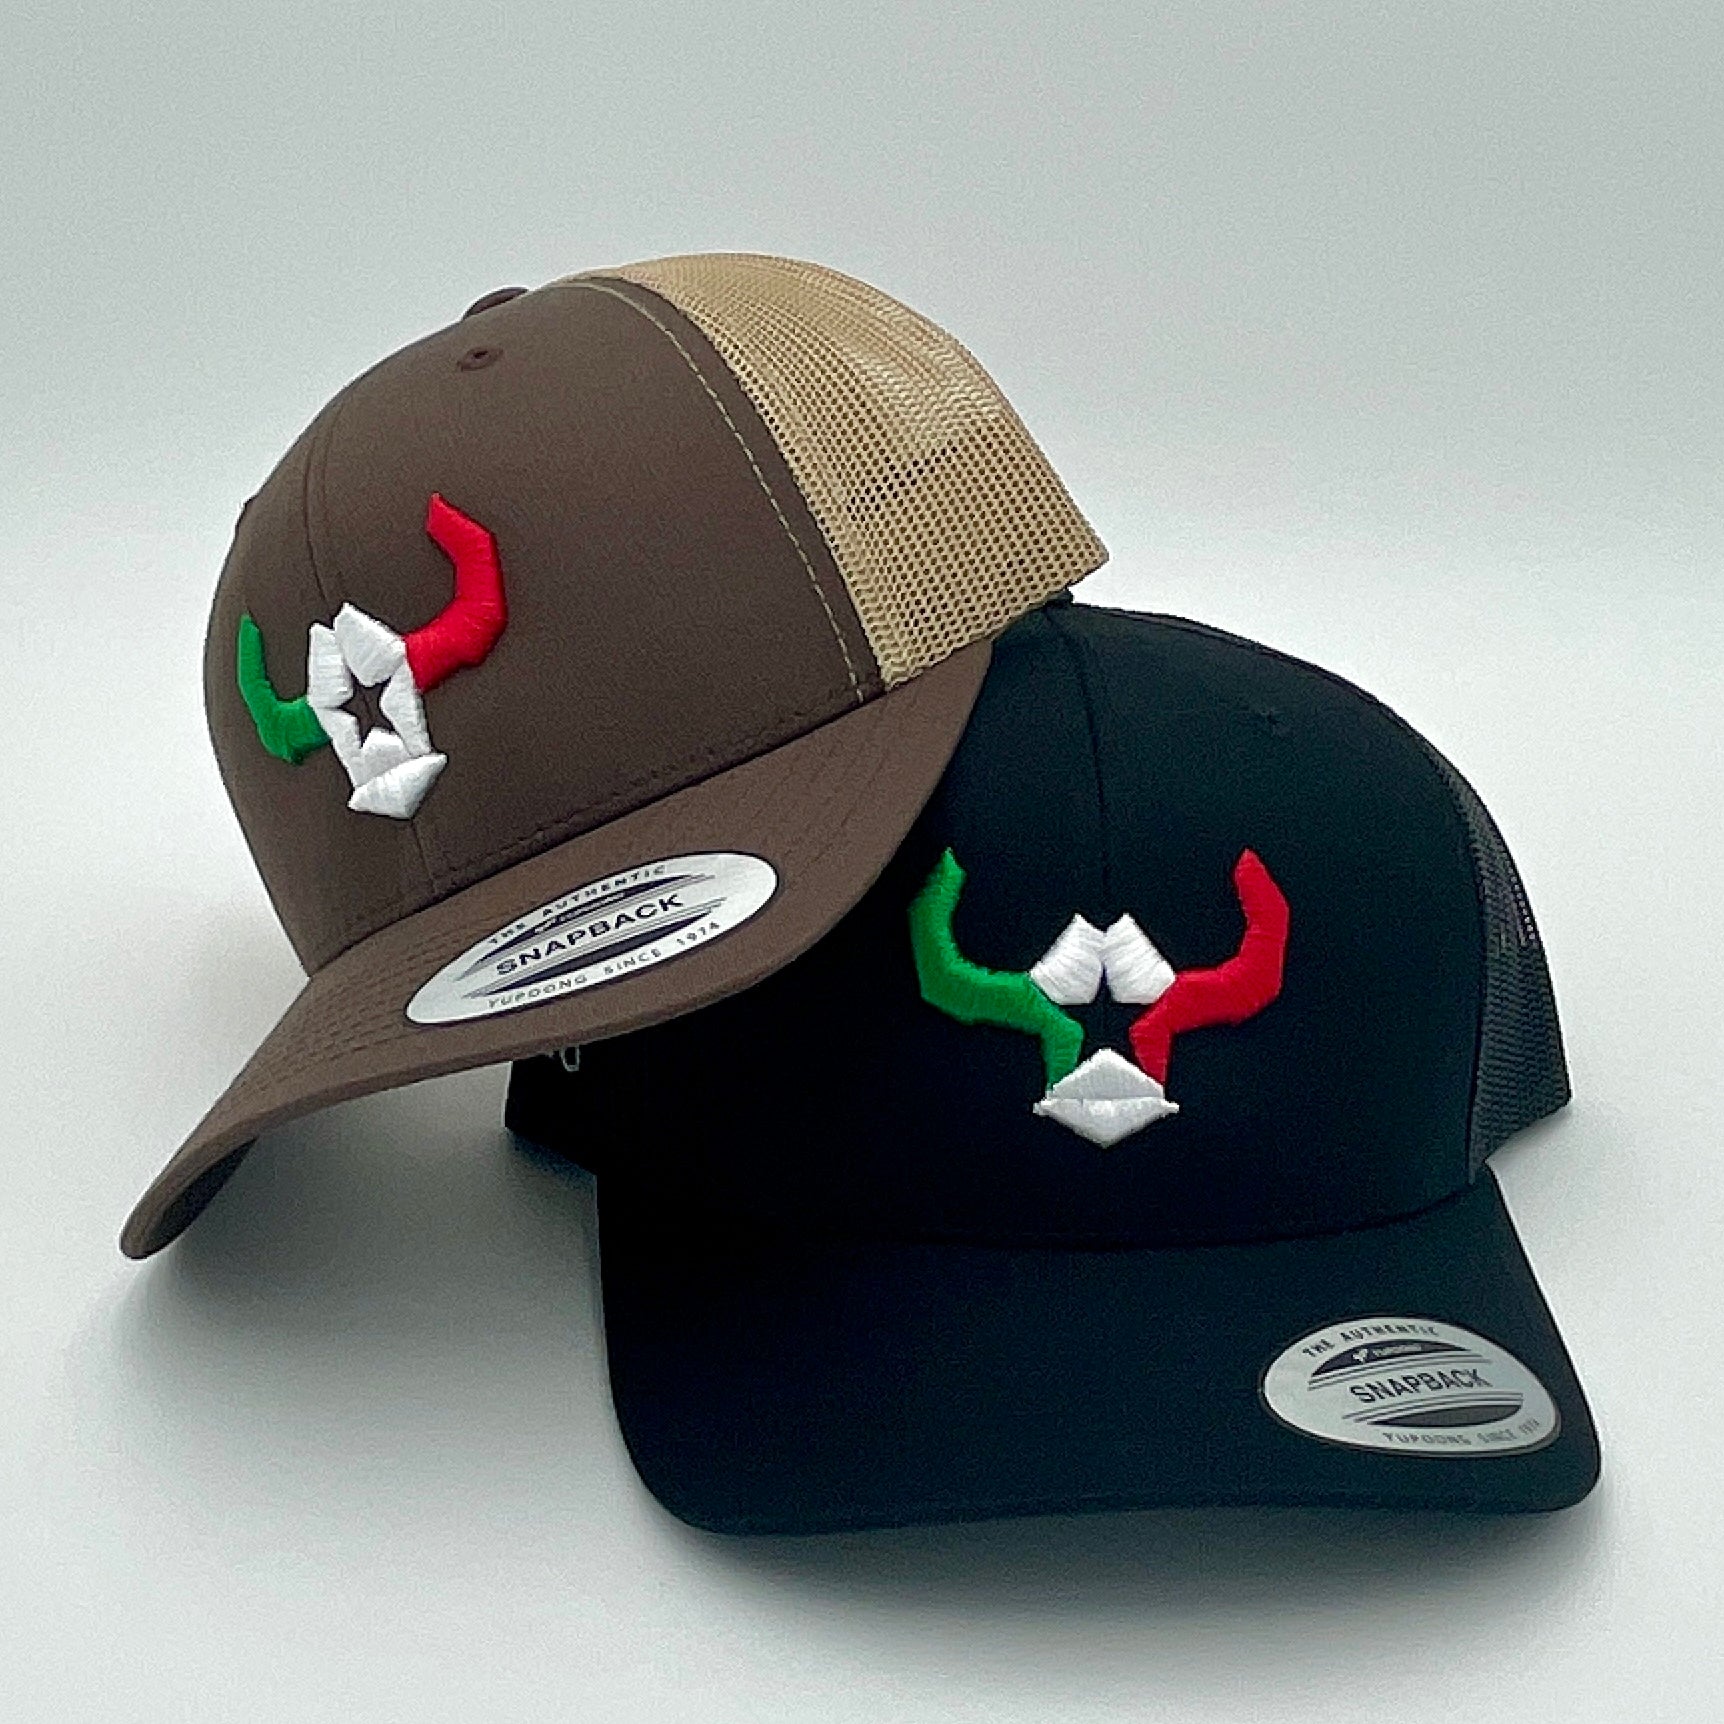 Brown Hat Tri Color Trucker Mesh Cap Yupoong Richardson112 Affordable Custom Apparel Embroidery Cheap Affordable Custom Hats & Caps